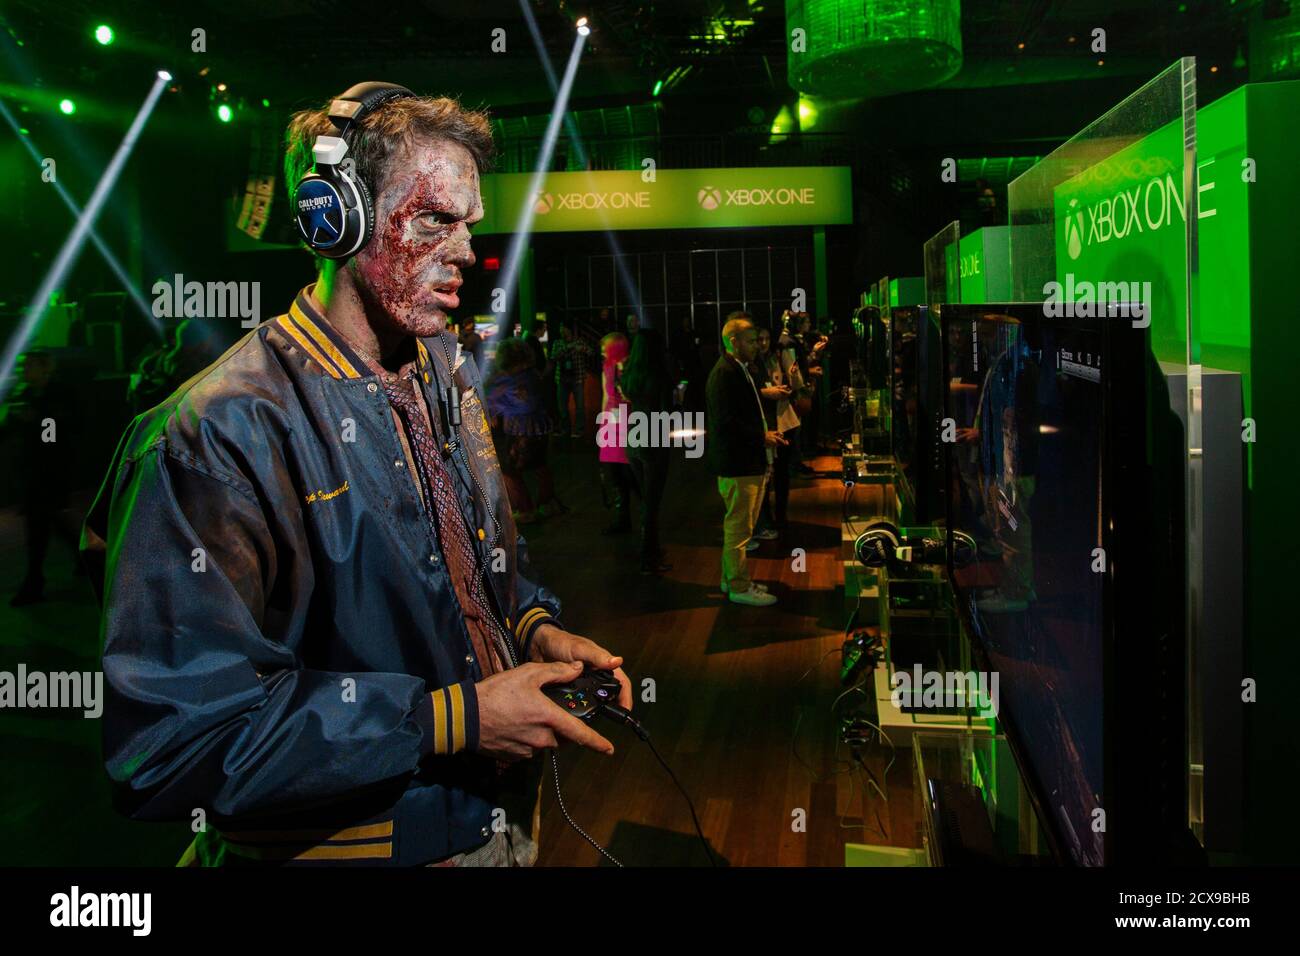 A man dressed as a zombie plays video games on an Xbox One console during a  midnight launch event in New York, November 21, 2013. REUTERS/Lucas Jackson  (UNITED STATES - Tags: ENTERTAINMENT